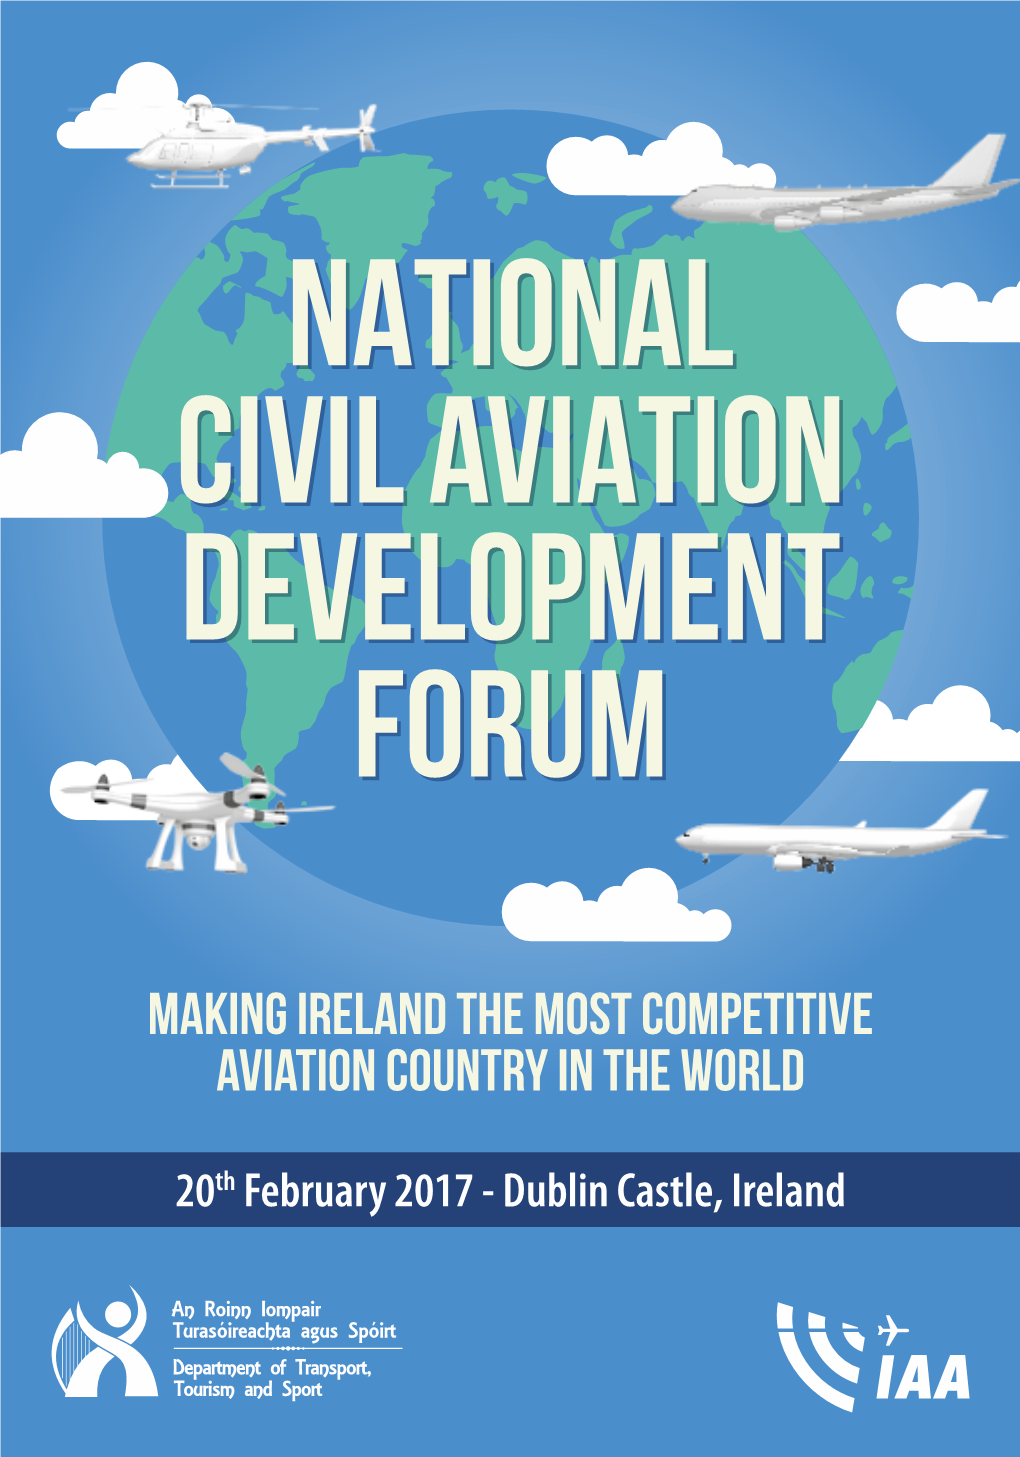 Making Ireland the Most Competitive Aviation Country in the World